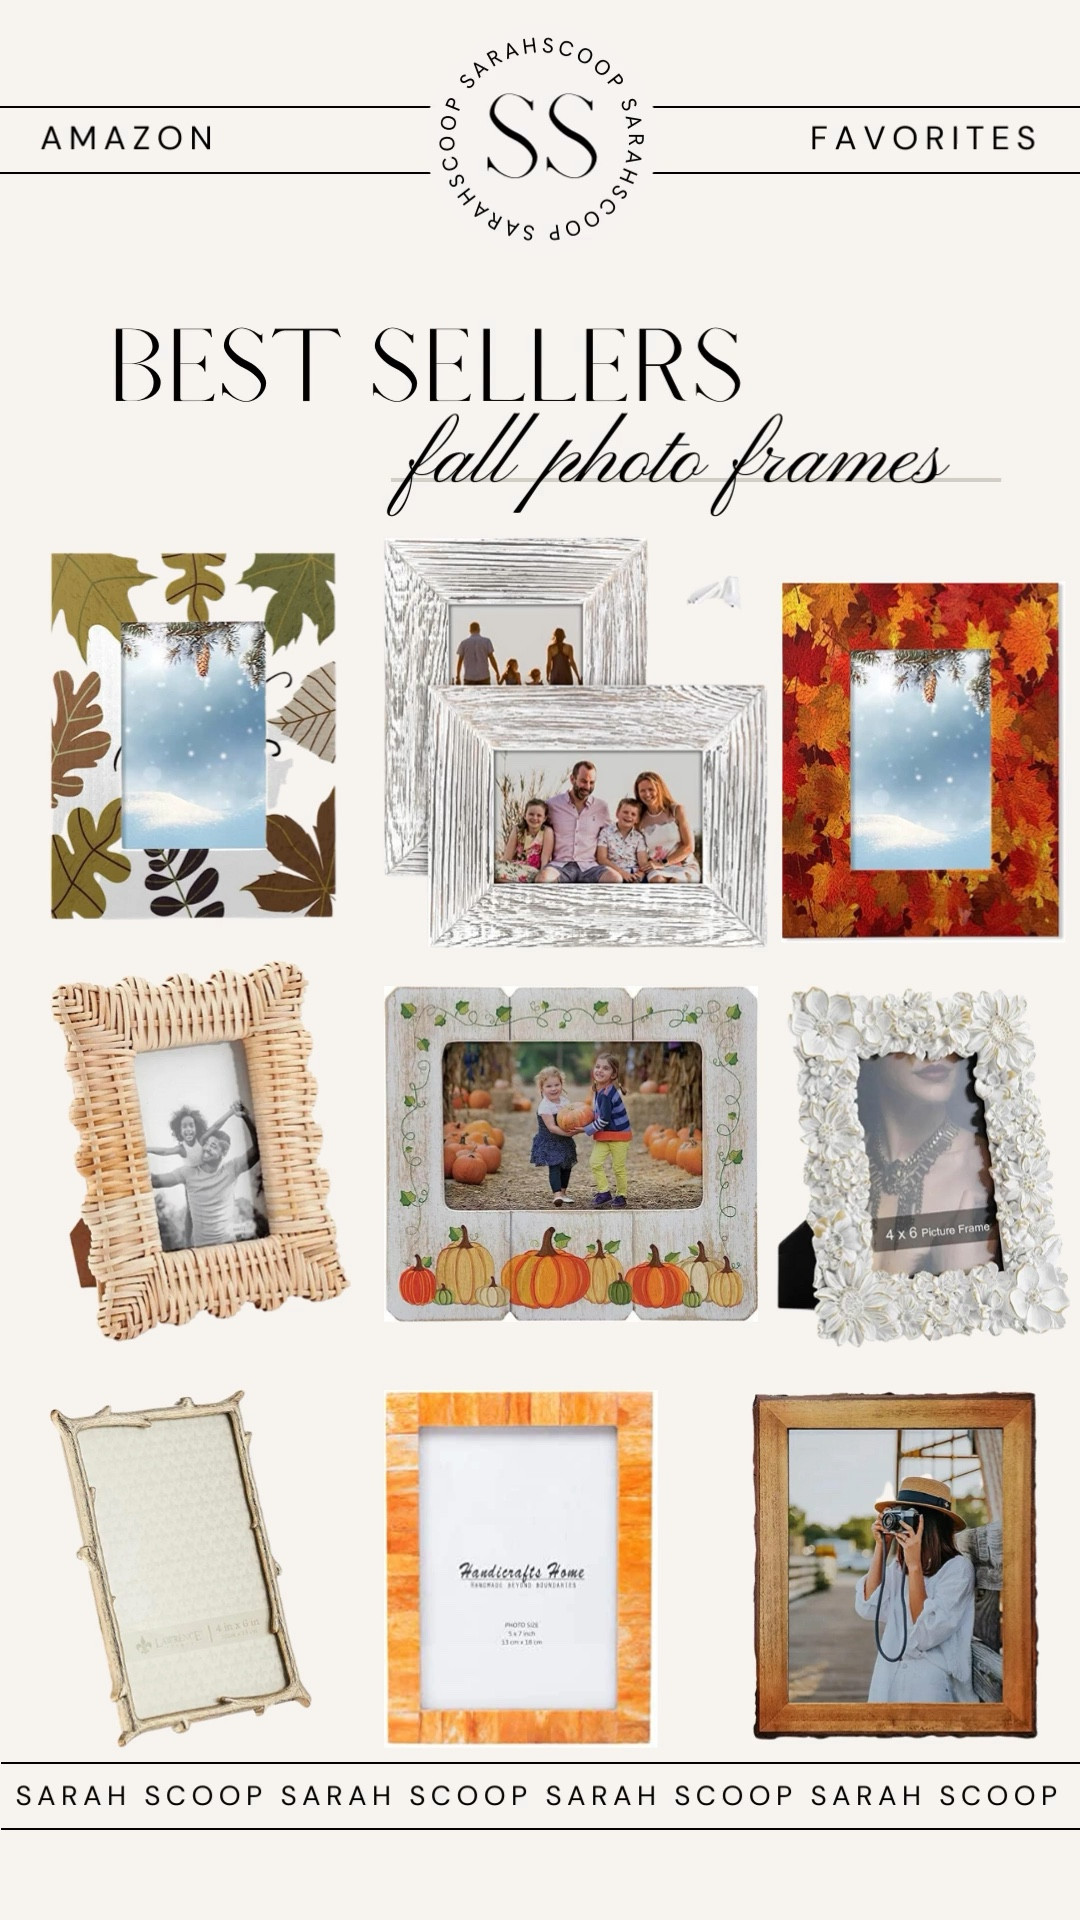  GLM Farmhouse Picture Frames, Holds 4 Photos,4x6 with Mat or  5x7 Picture Frame Collage, Picture Frames Collage Wall Decor, Photo Collage  Frame, Collage Frames for 4x6 Pictures (White)